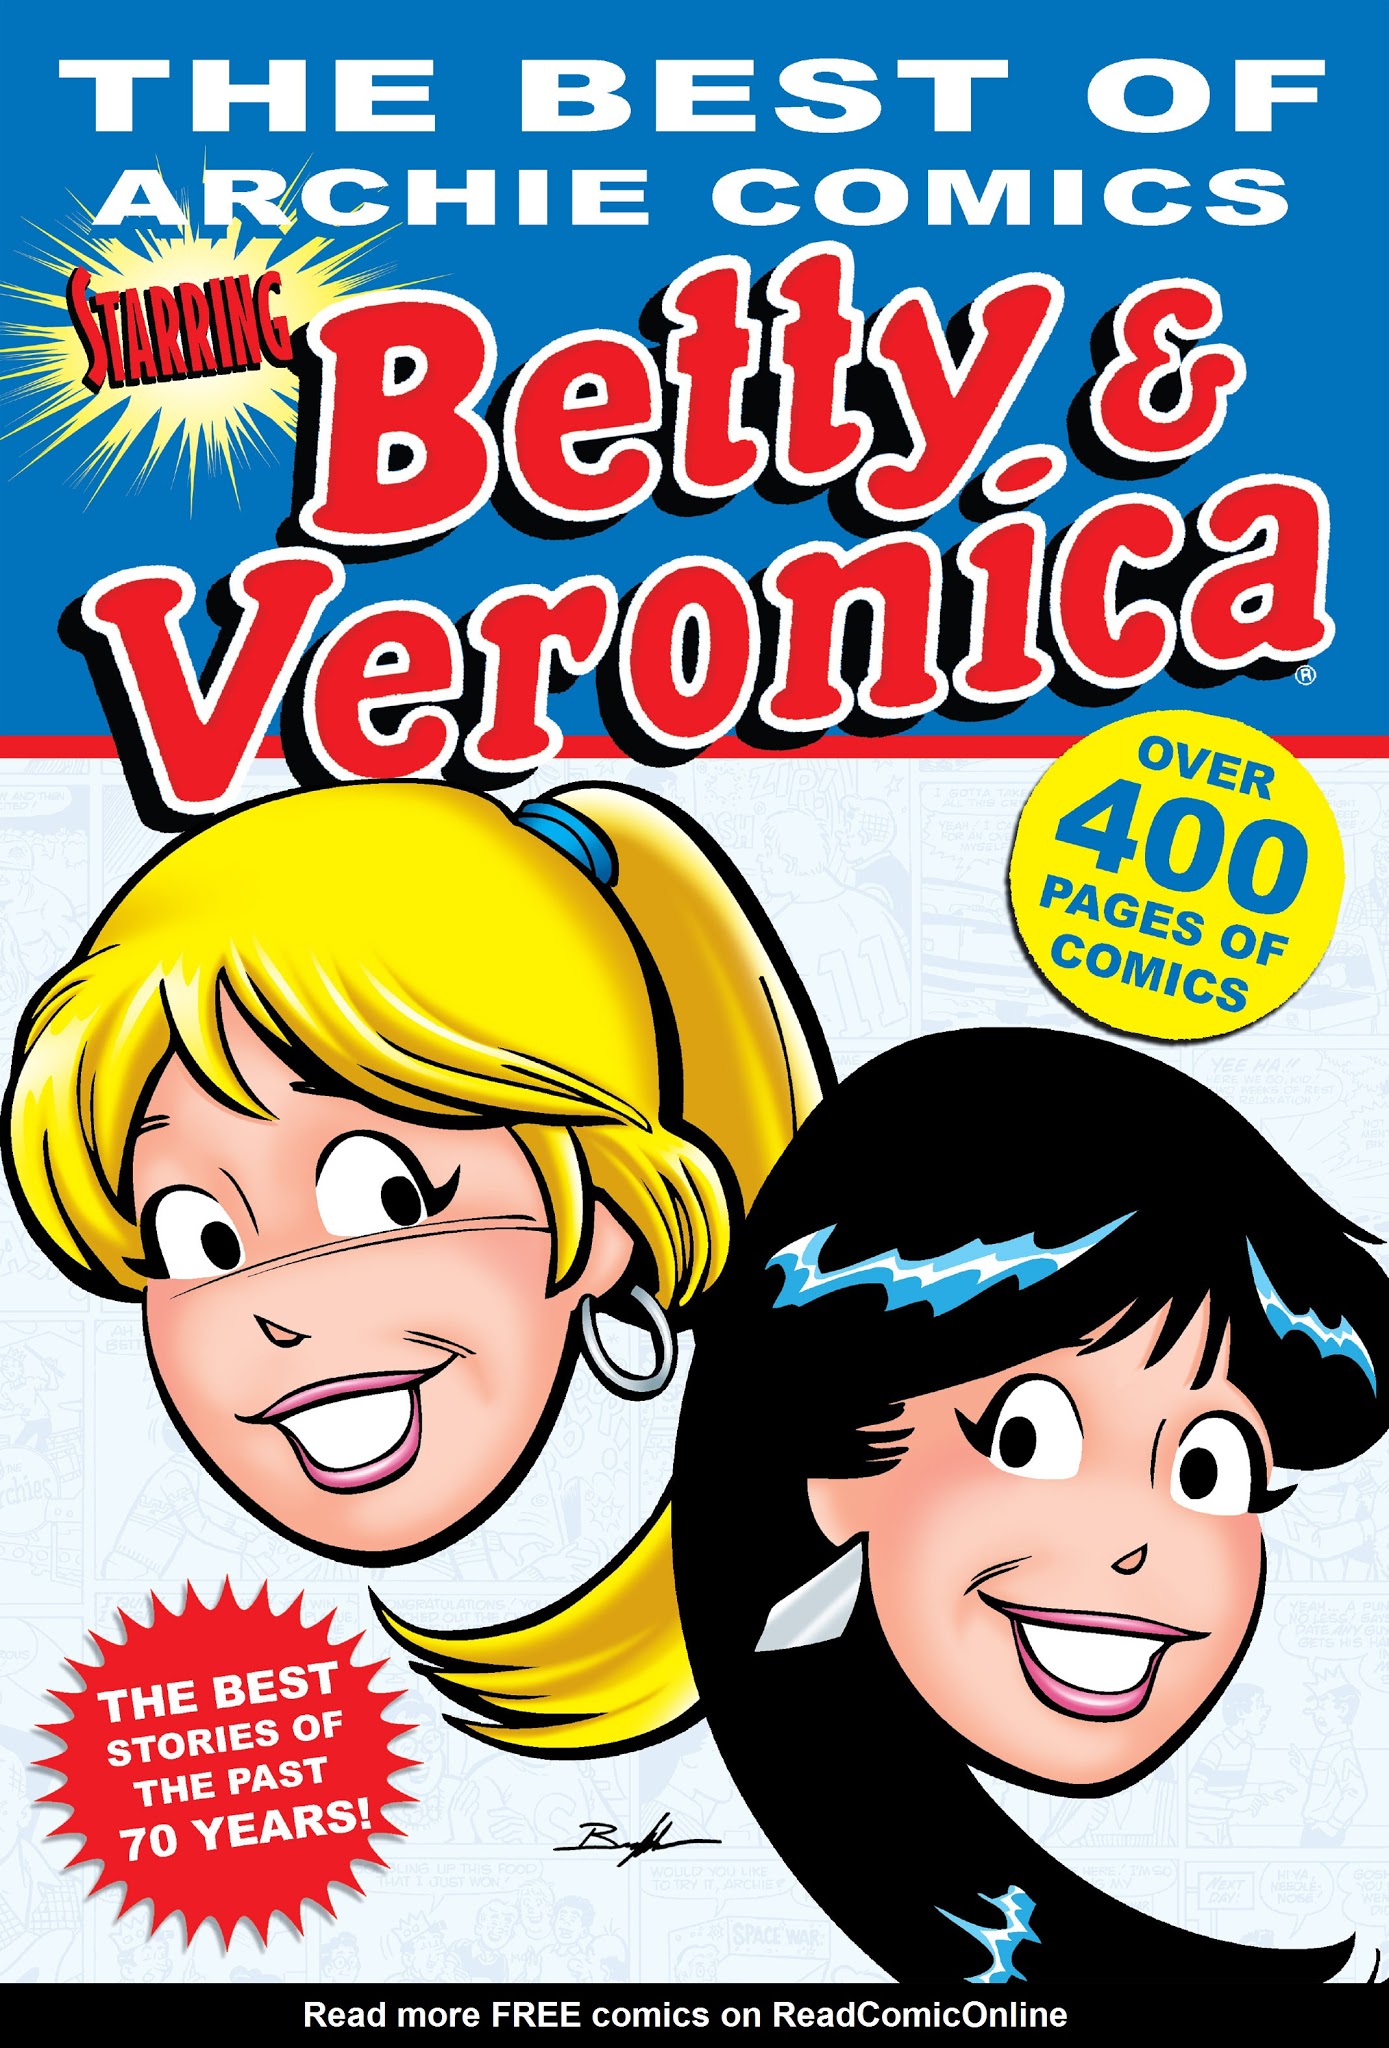 Read online The Best of Archie Comics: Betty & Veronica comic -  Issue # TPB - 1